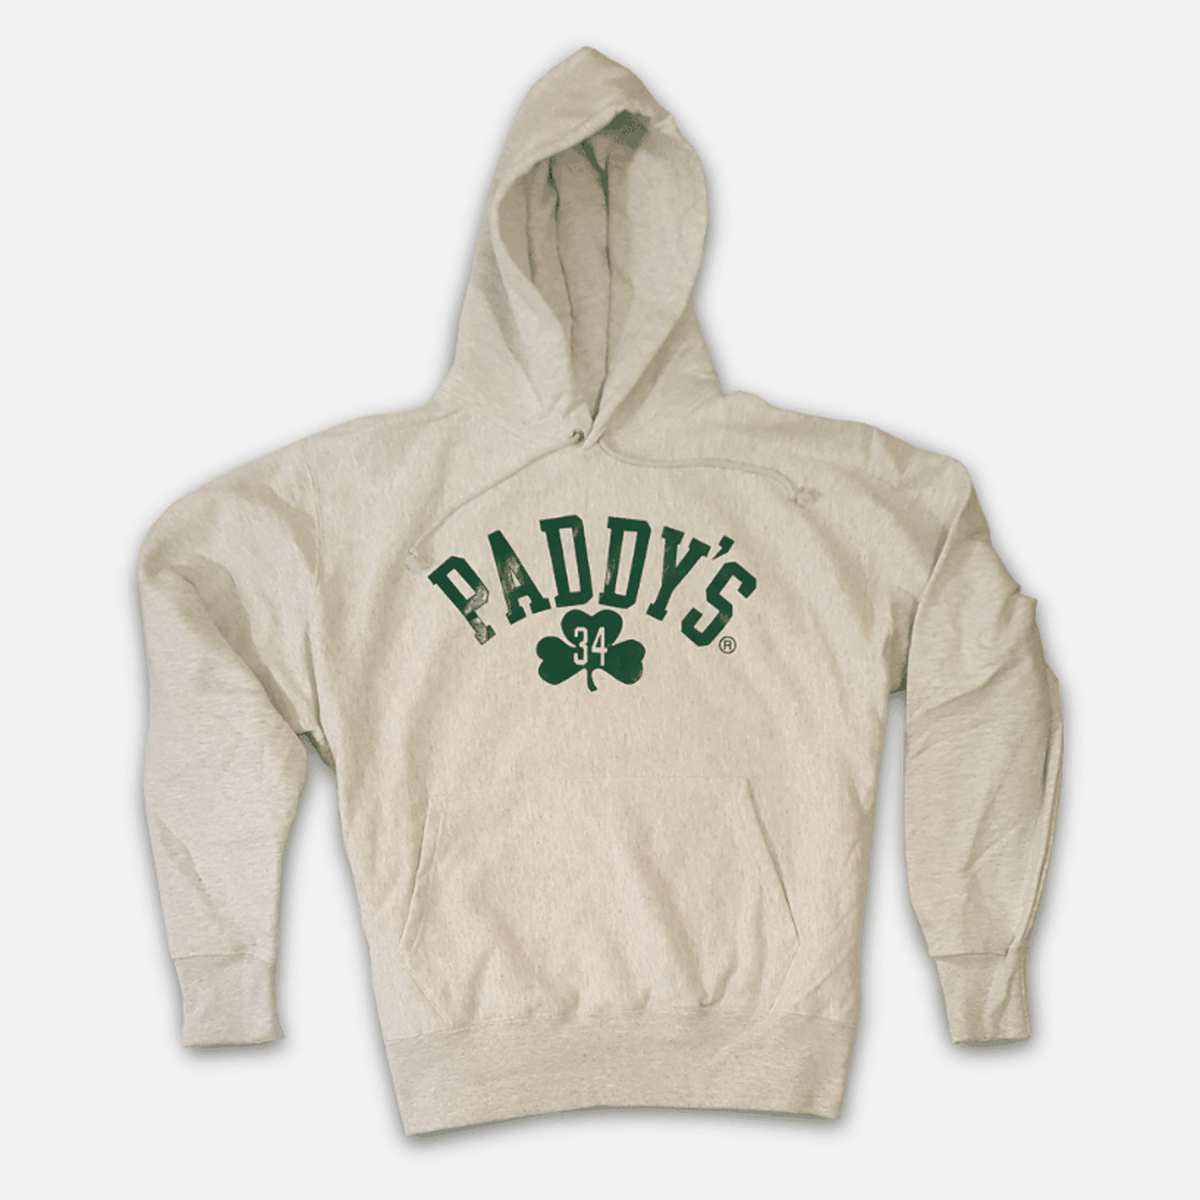 White hoodie has green shamrock and Paddy’s logo